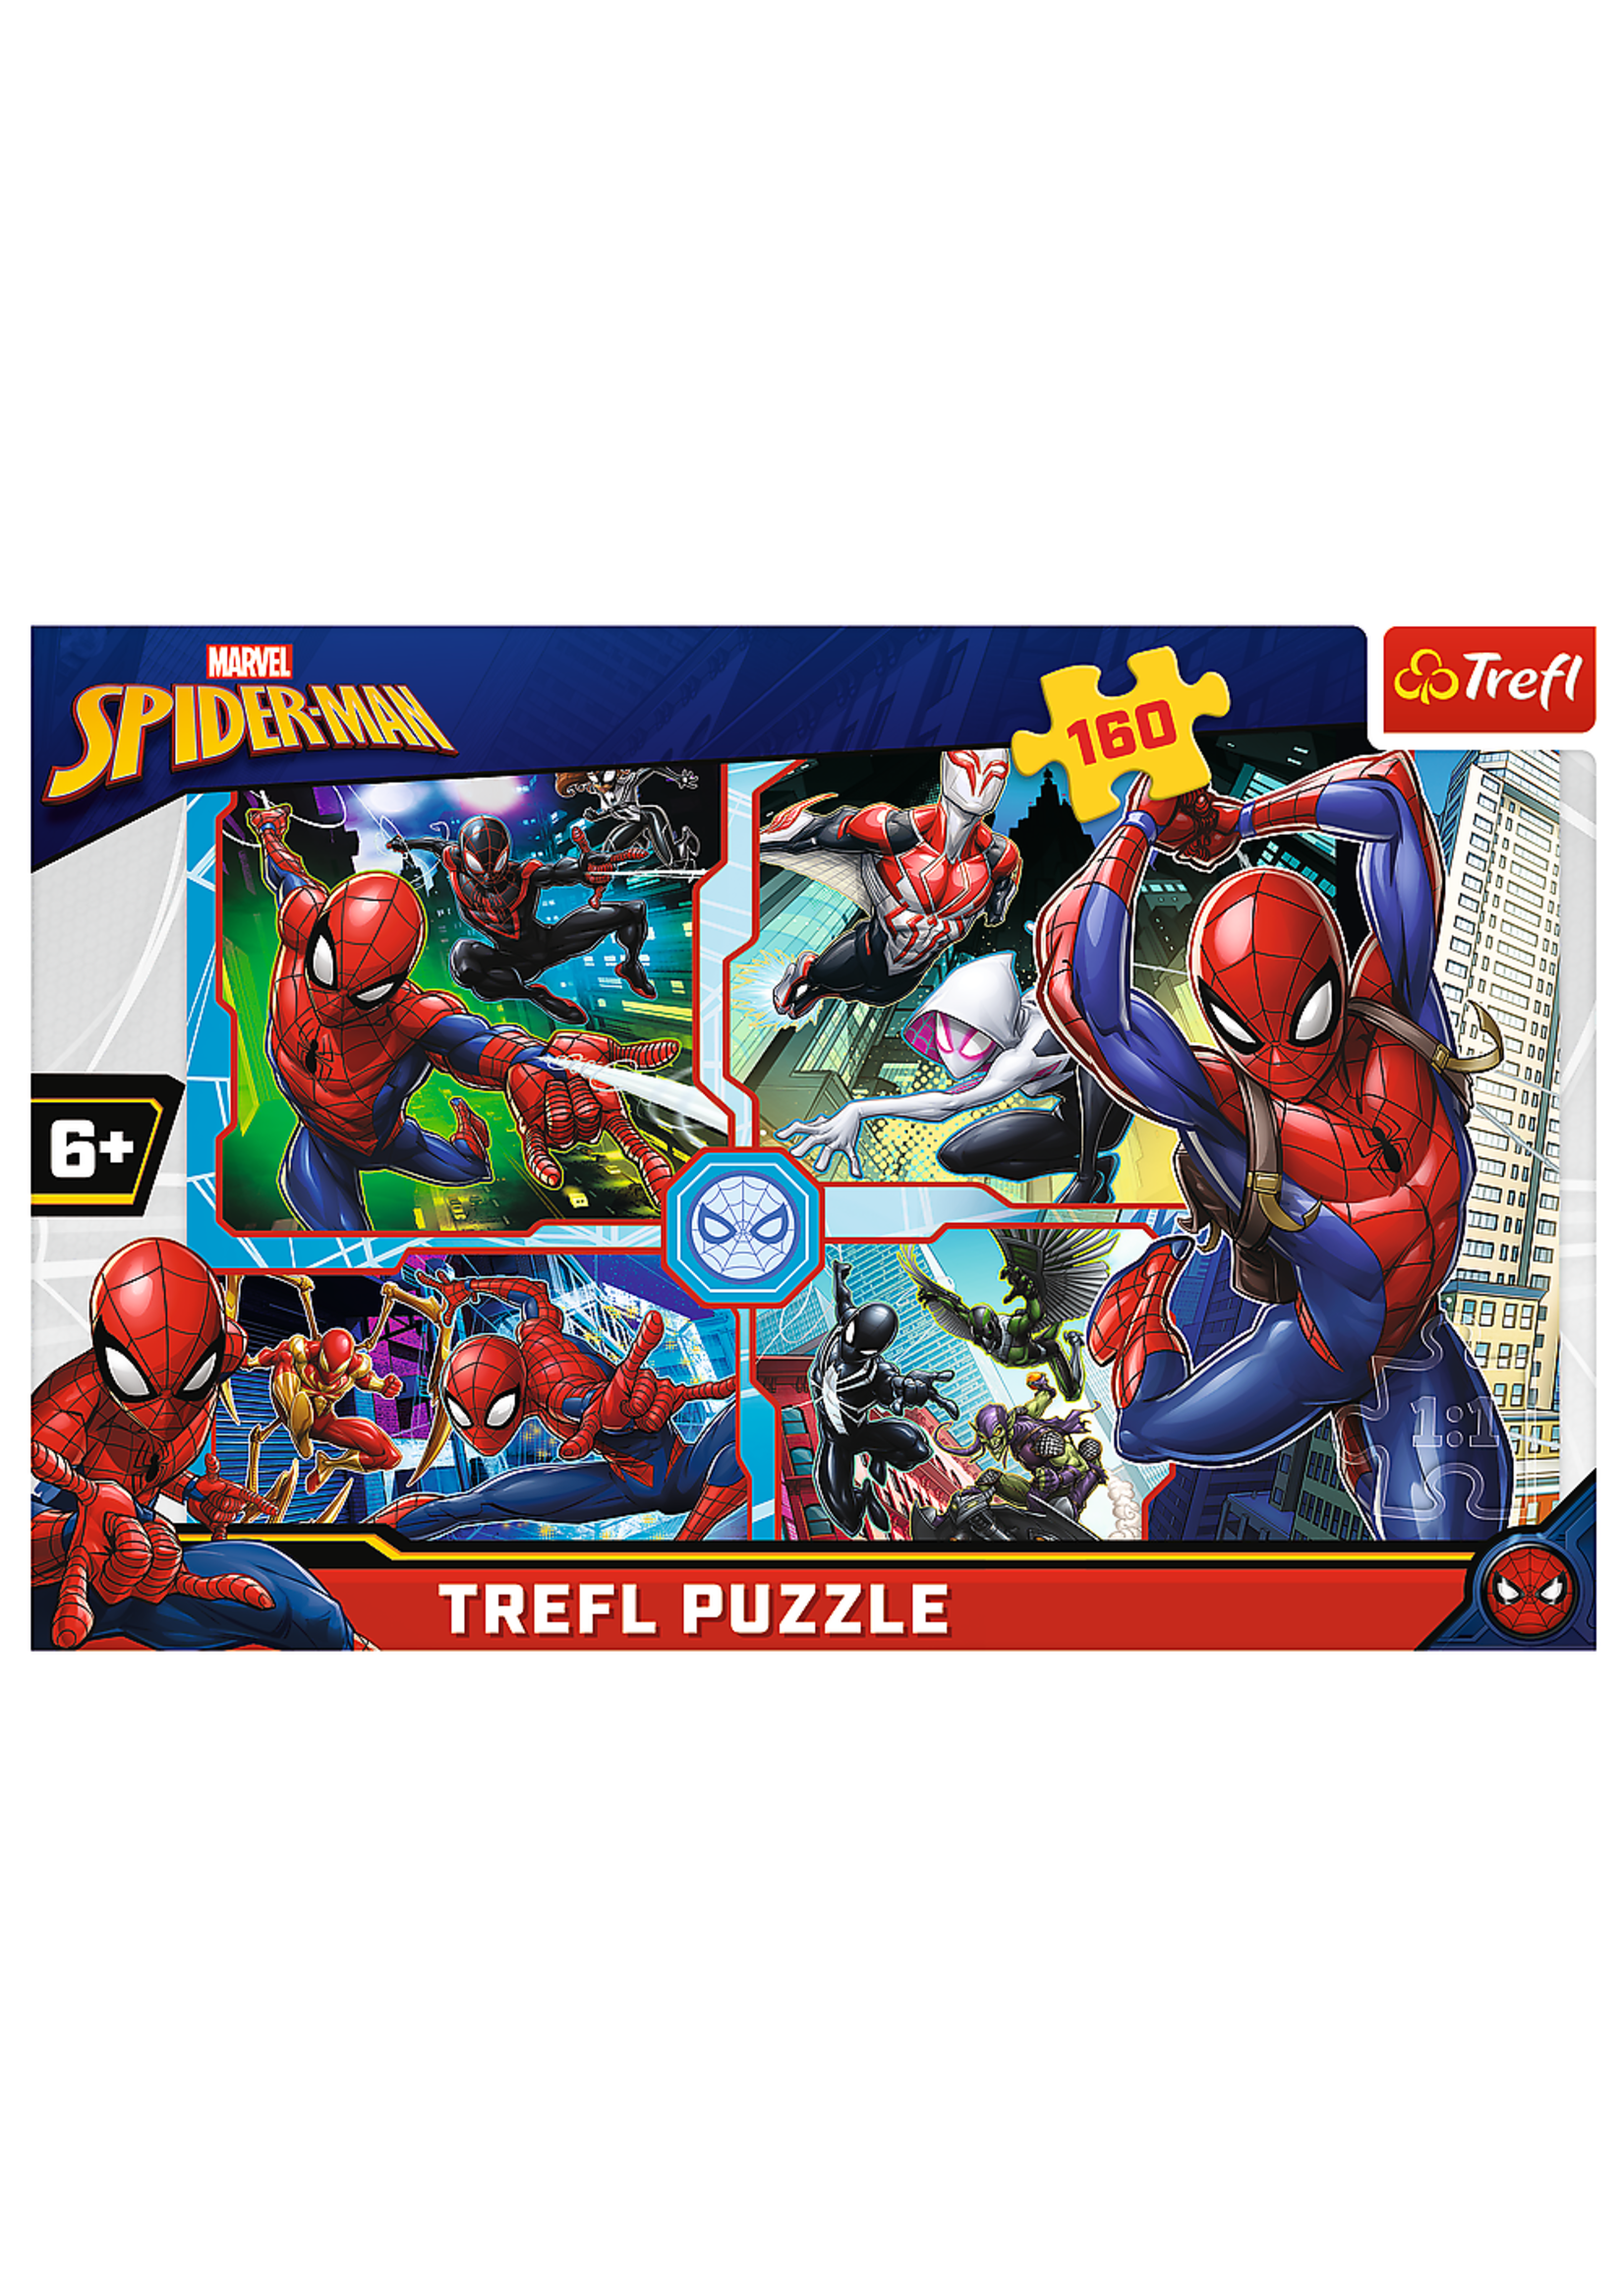 Marvel Spiderman puzzle from Marvel